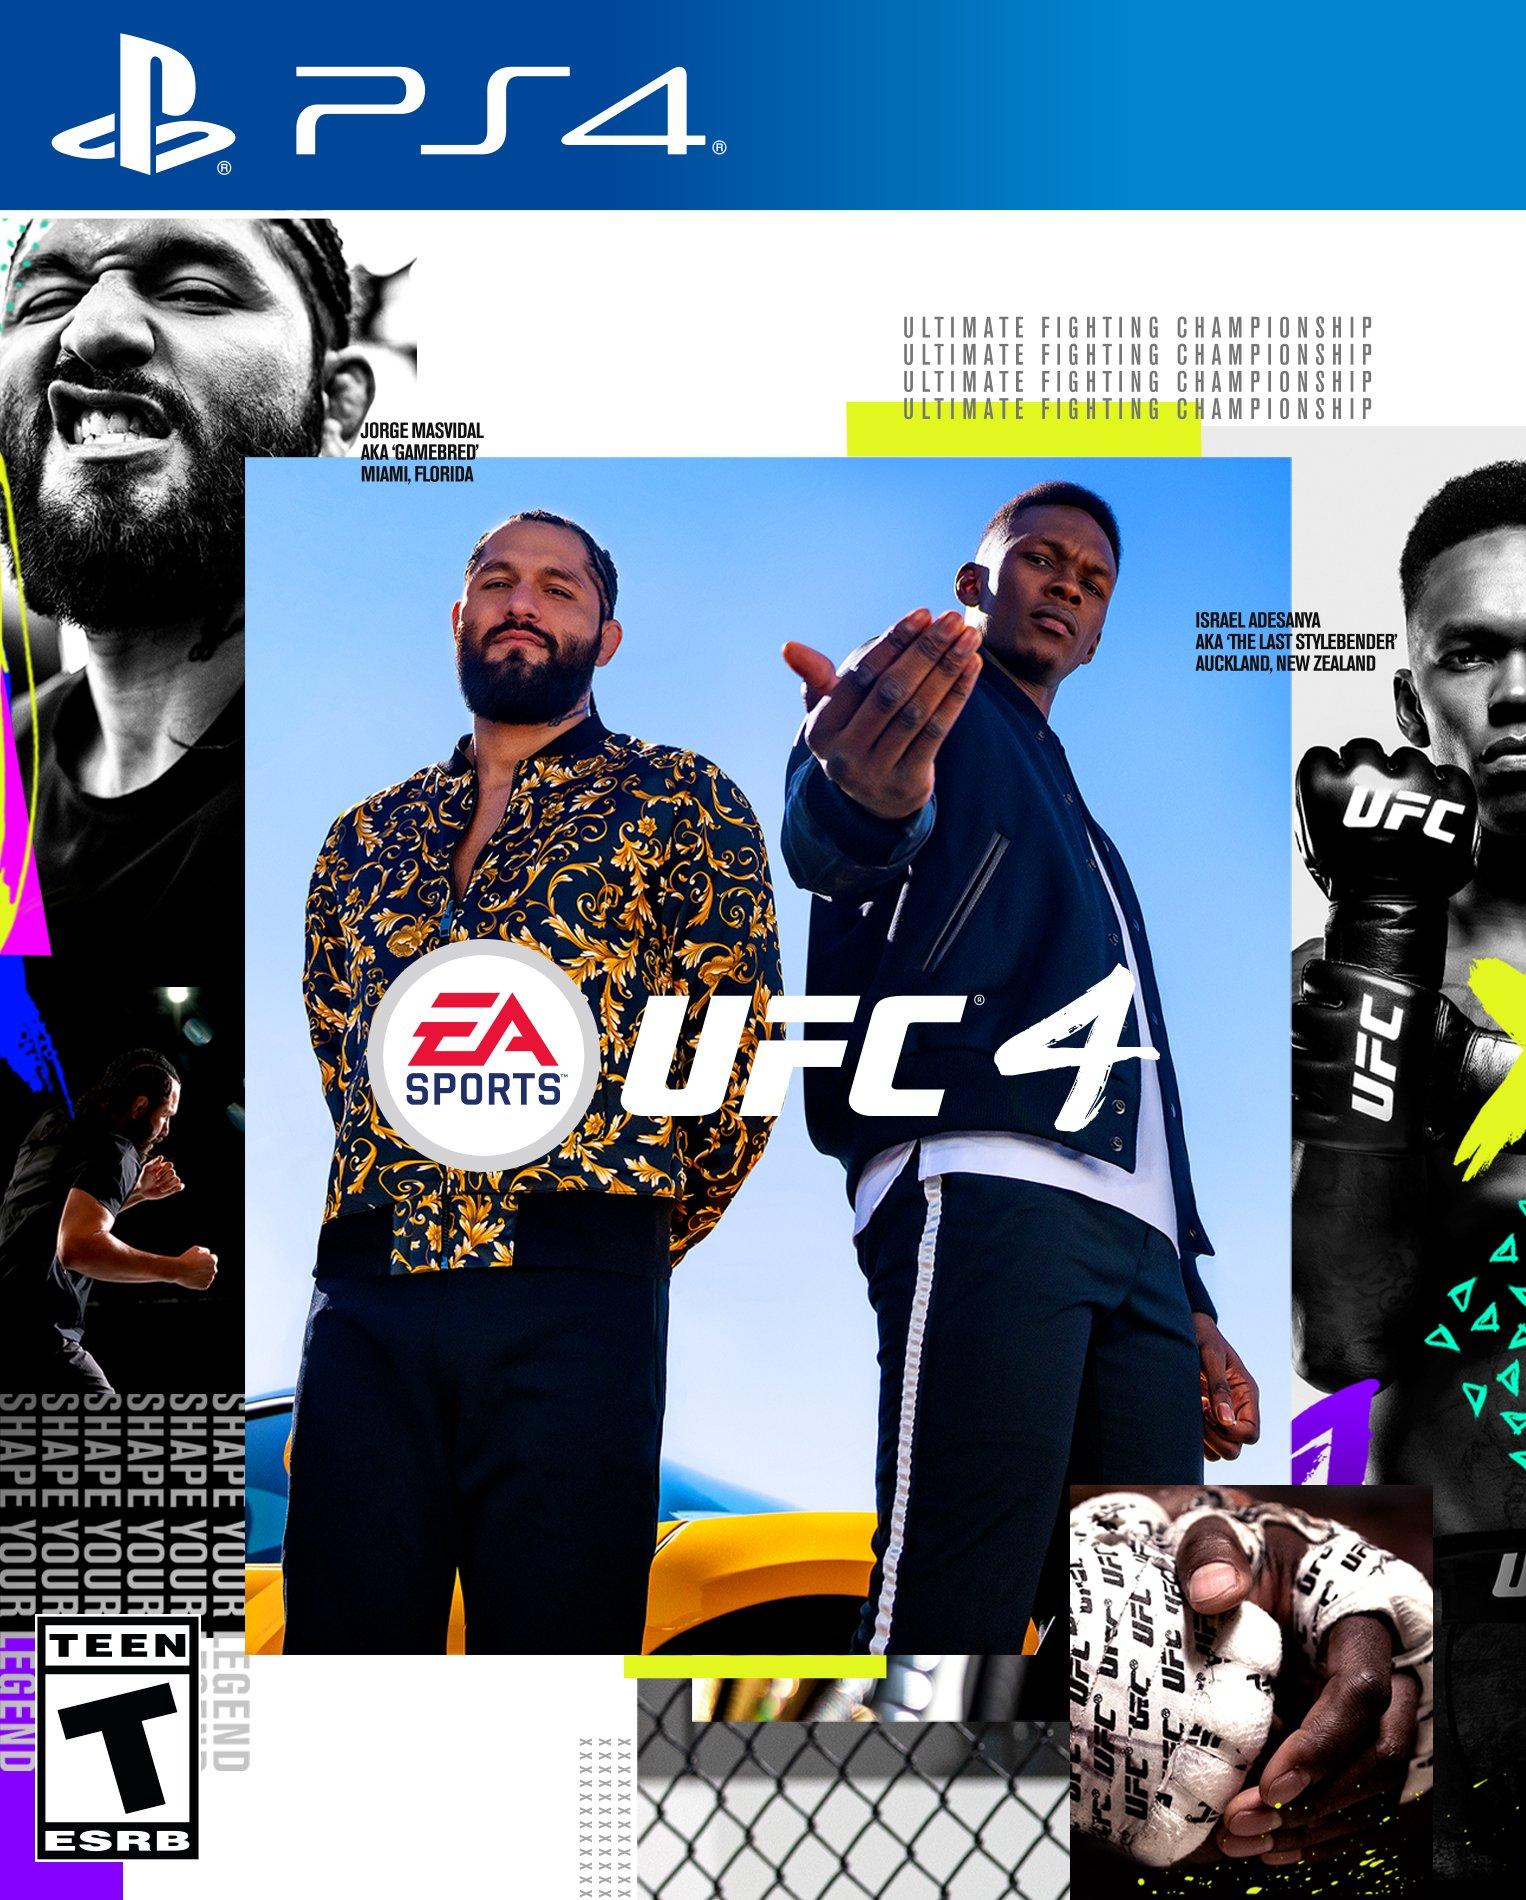 PlayStation Plus gets three free games- EA Sports UFC 4 to Planet Coaster